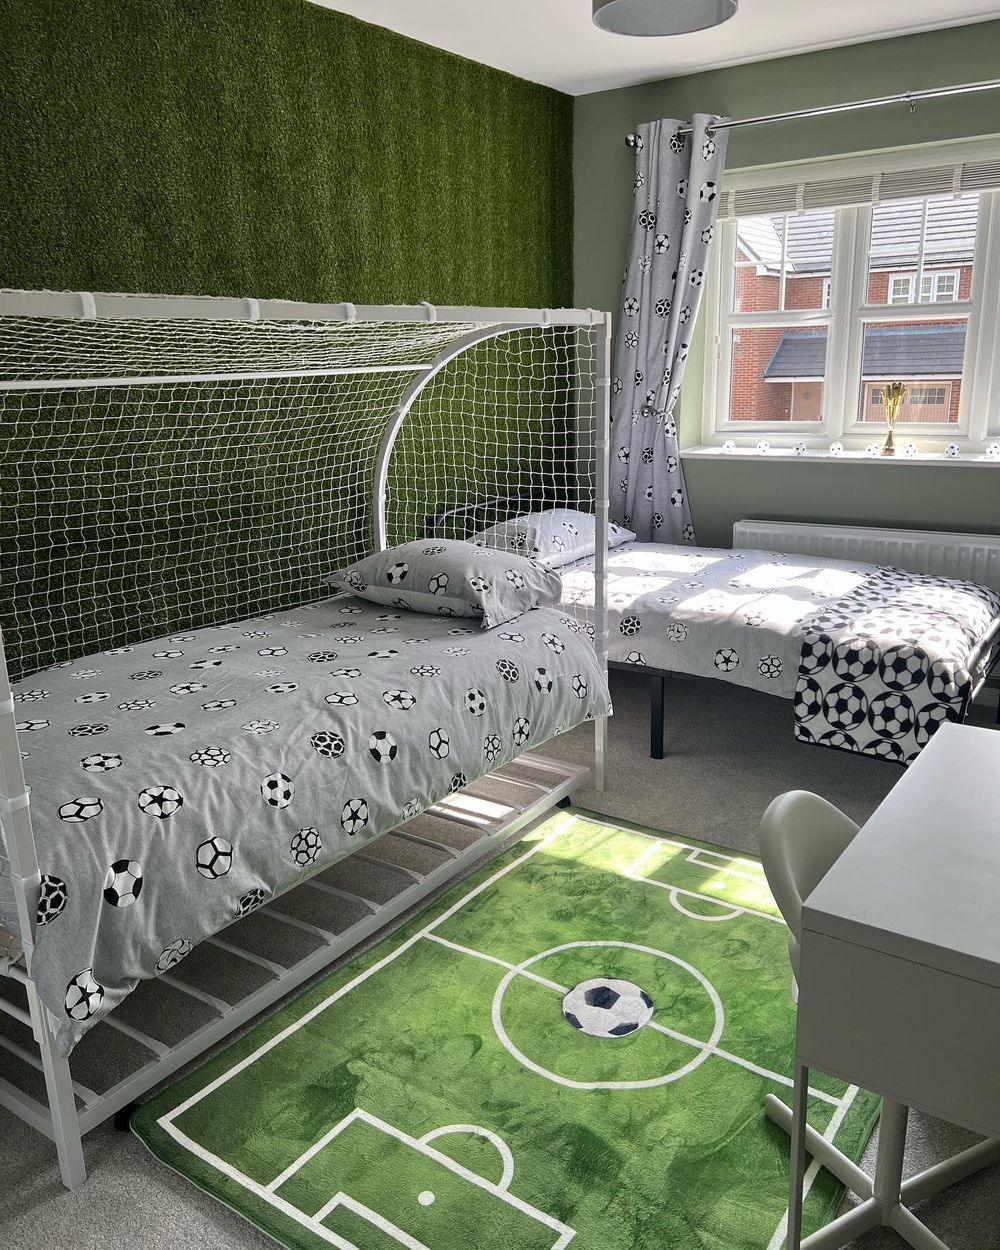 Boys bedroom Soccer Theme our__turtonhome